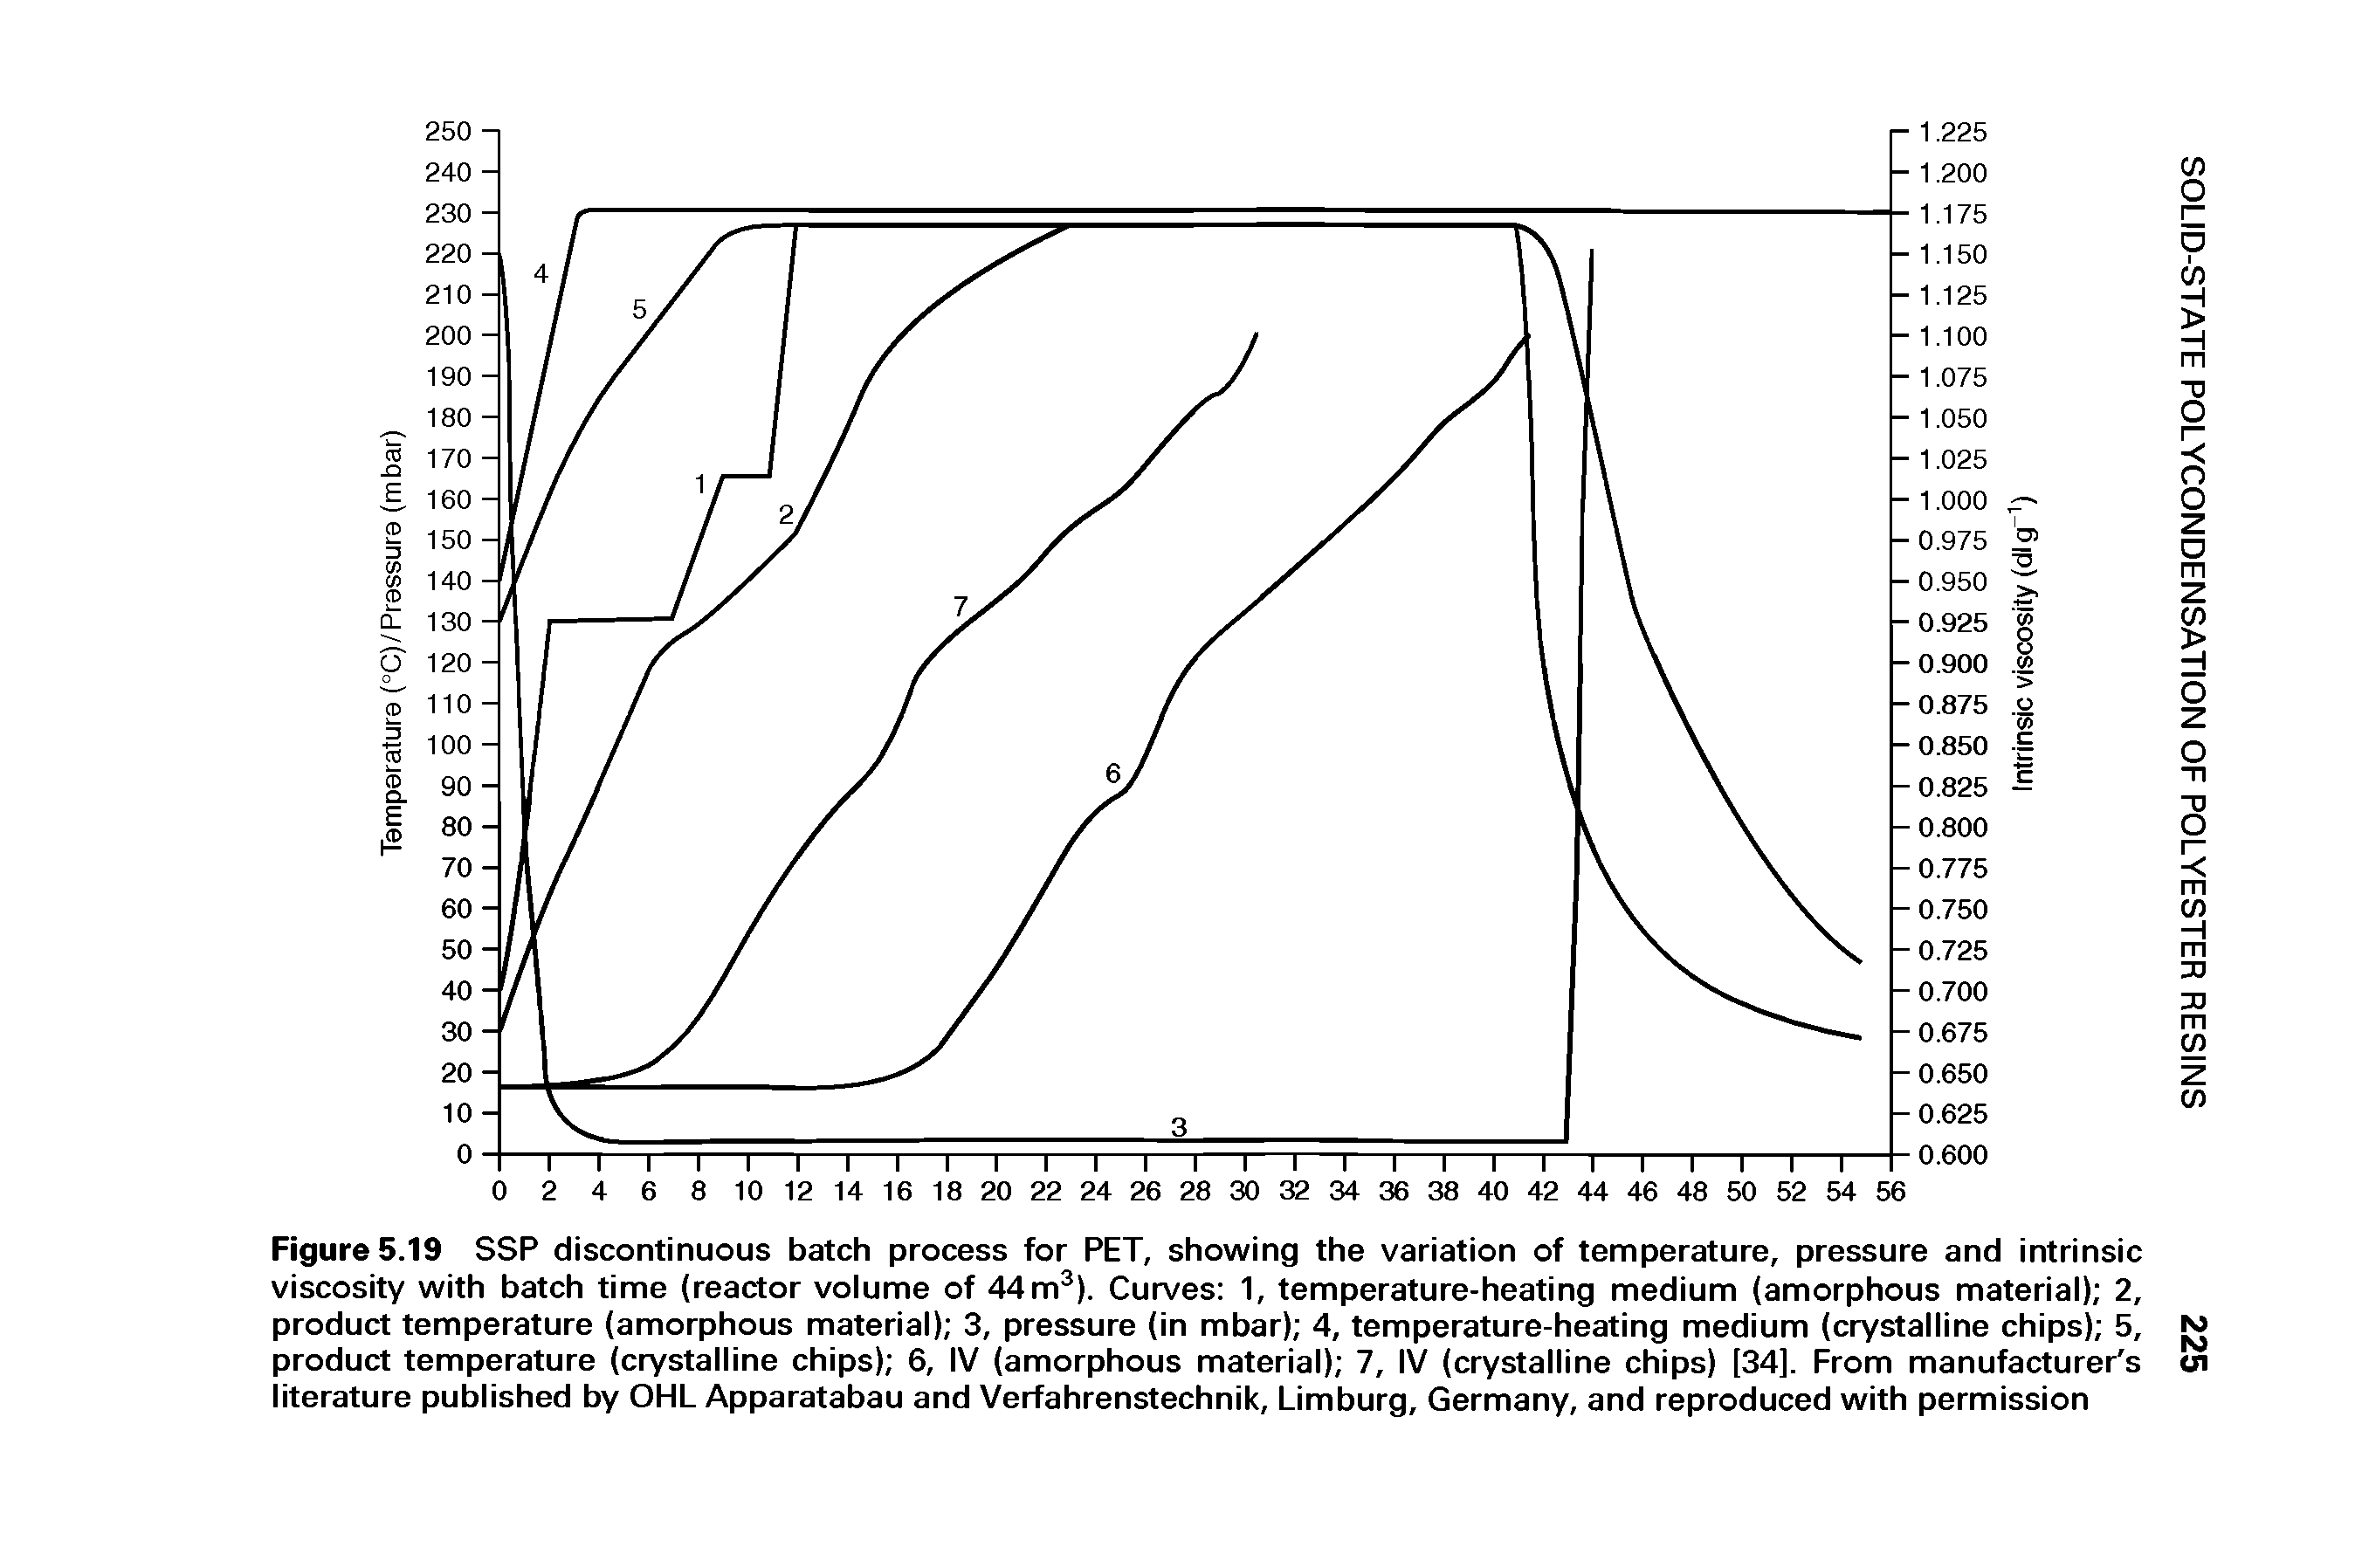 Figure 5.19 SSP discontinuous batch process for PET, showing the variation of temperature, pressure and intrinsic viscosity with batch time (reactor volume of 44 m ). Curves 1, temperature-heating medium (amorphous material) 2, product temperature (amorphous material) 3, pressure (in mbar) 4, temperature-heating medium (crystalline chips) 5, product temperature (crystalline chips) 6, IV (amorphous material) 7, IV (crystalline chips) [34]. From manufacturer s literature published by OHL Apparatabau and Verfahrenstechnik, Limburg, Germany, and reproduced with permission...